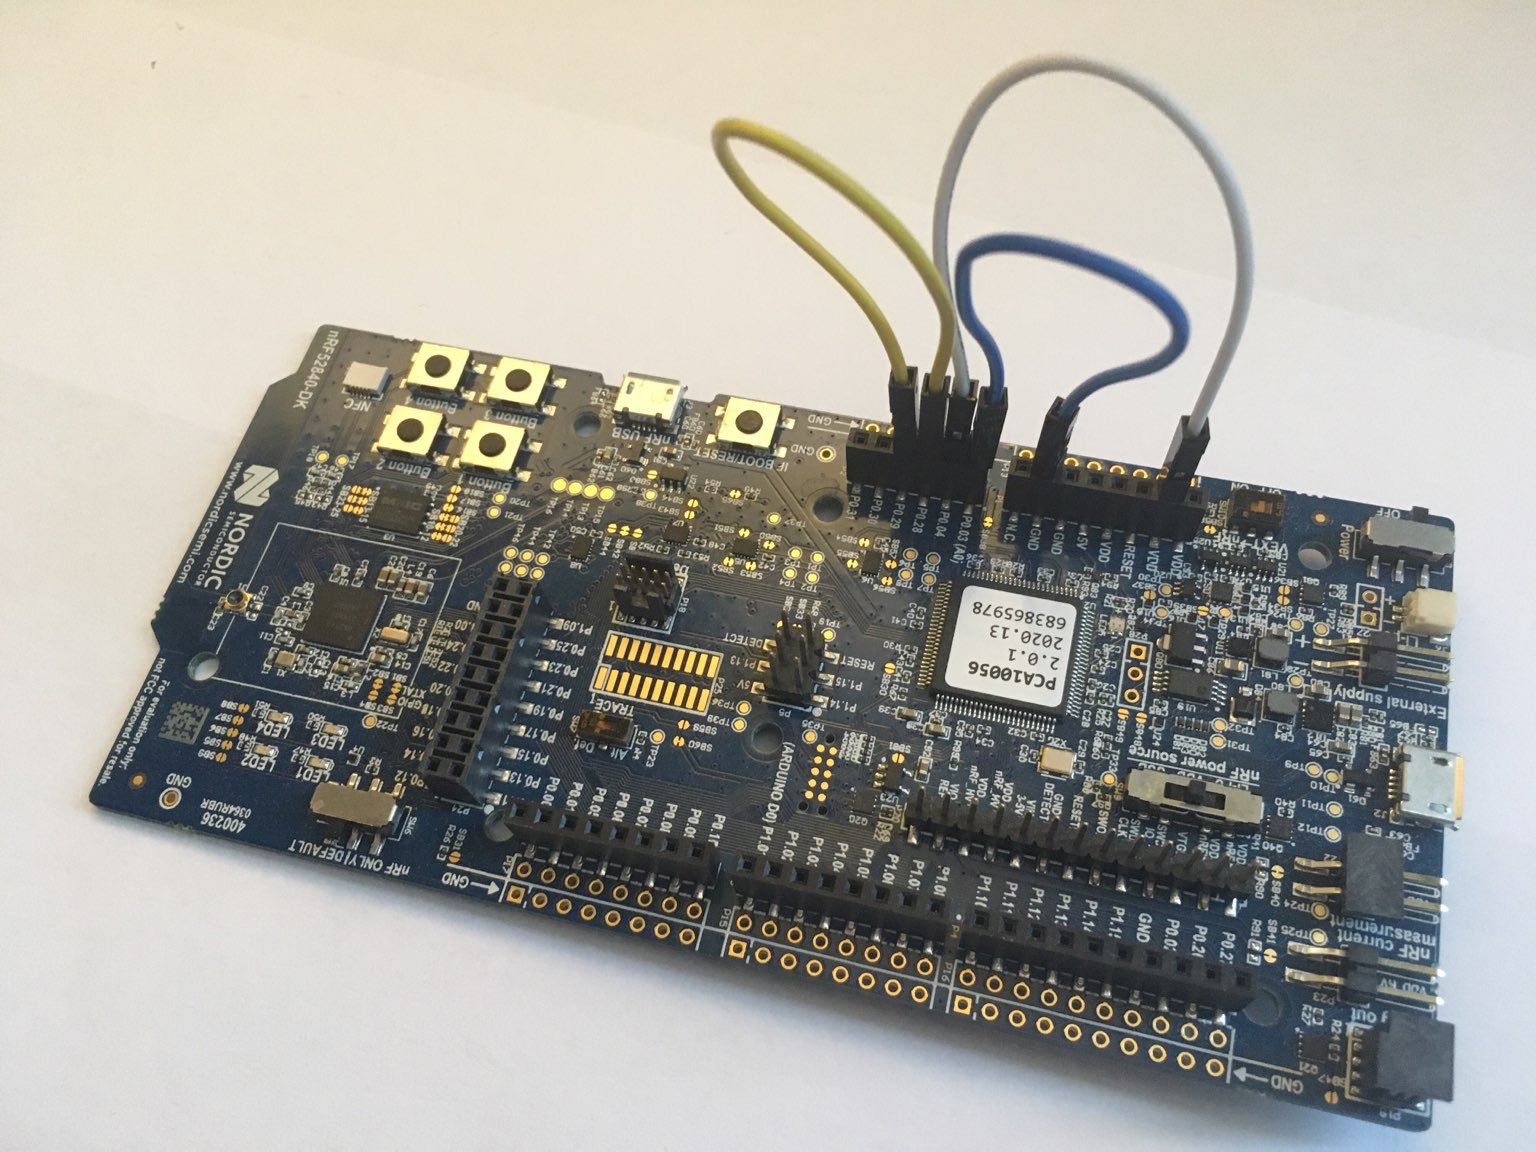 Hardware setup for testing the nRF52840 Hardware Abstraction Layer: a nRF52840 DK development board plus 3 wires that connect some pins to each other